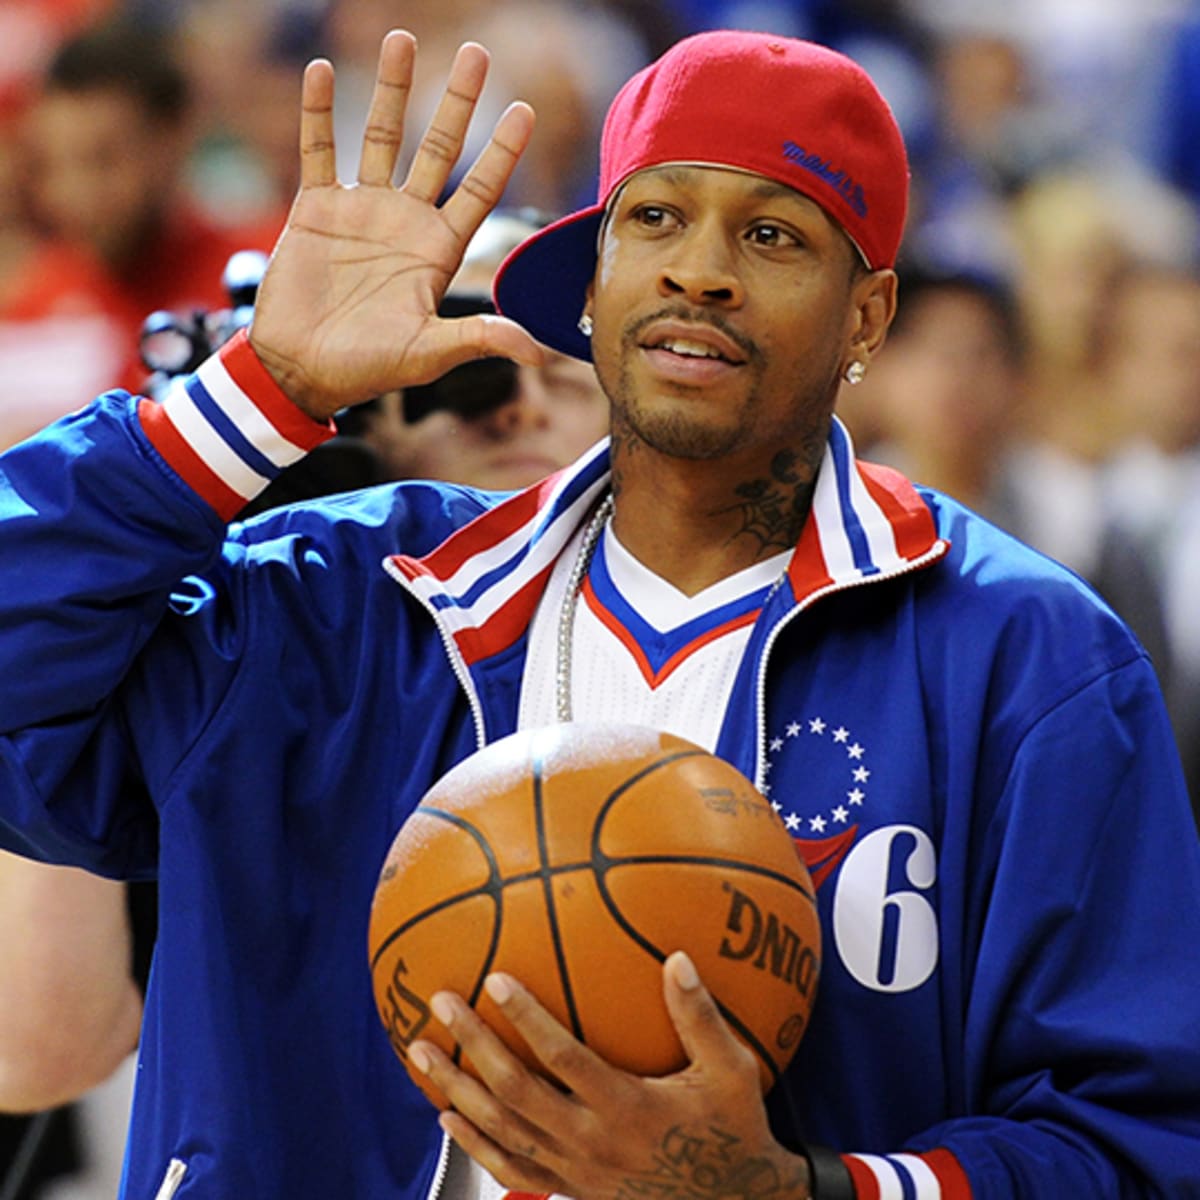 Sixers could soon bring back black jerseys that Allen Iverson made iconic